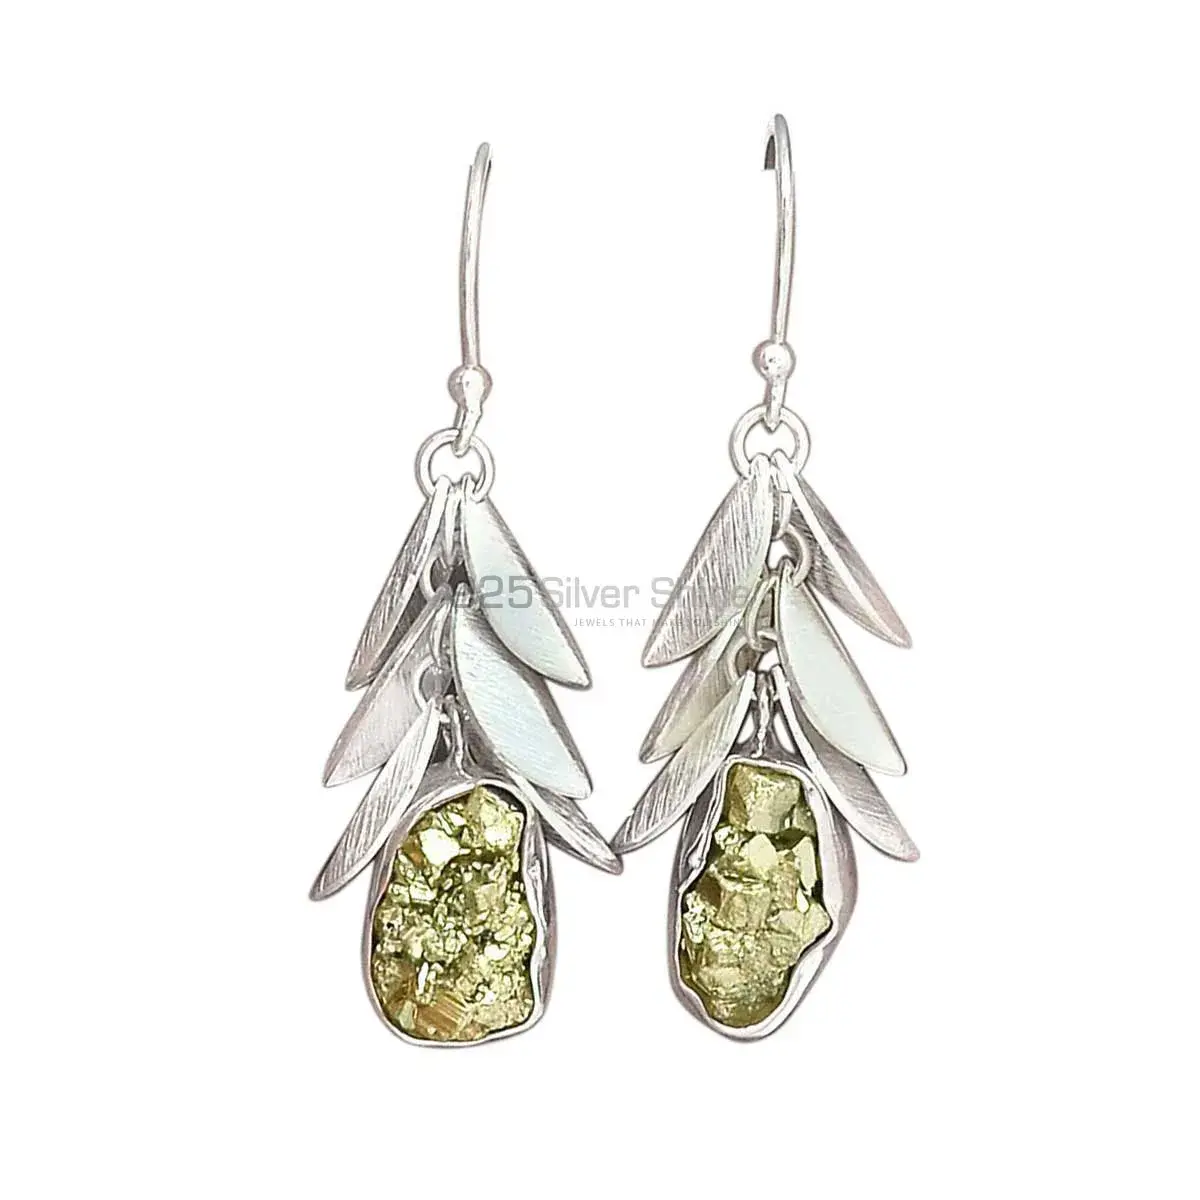 High Quality 925 Sterling Silver Earrings In Pyrite Gemstone Jewelry 925SE3010_1